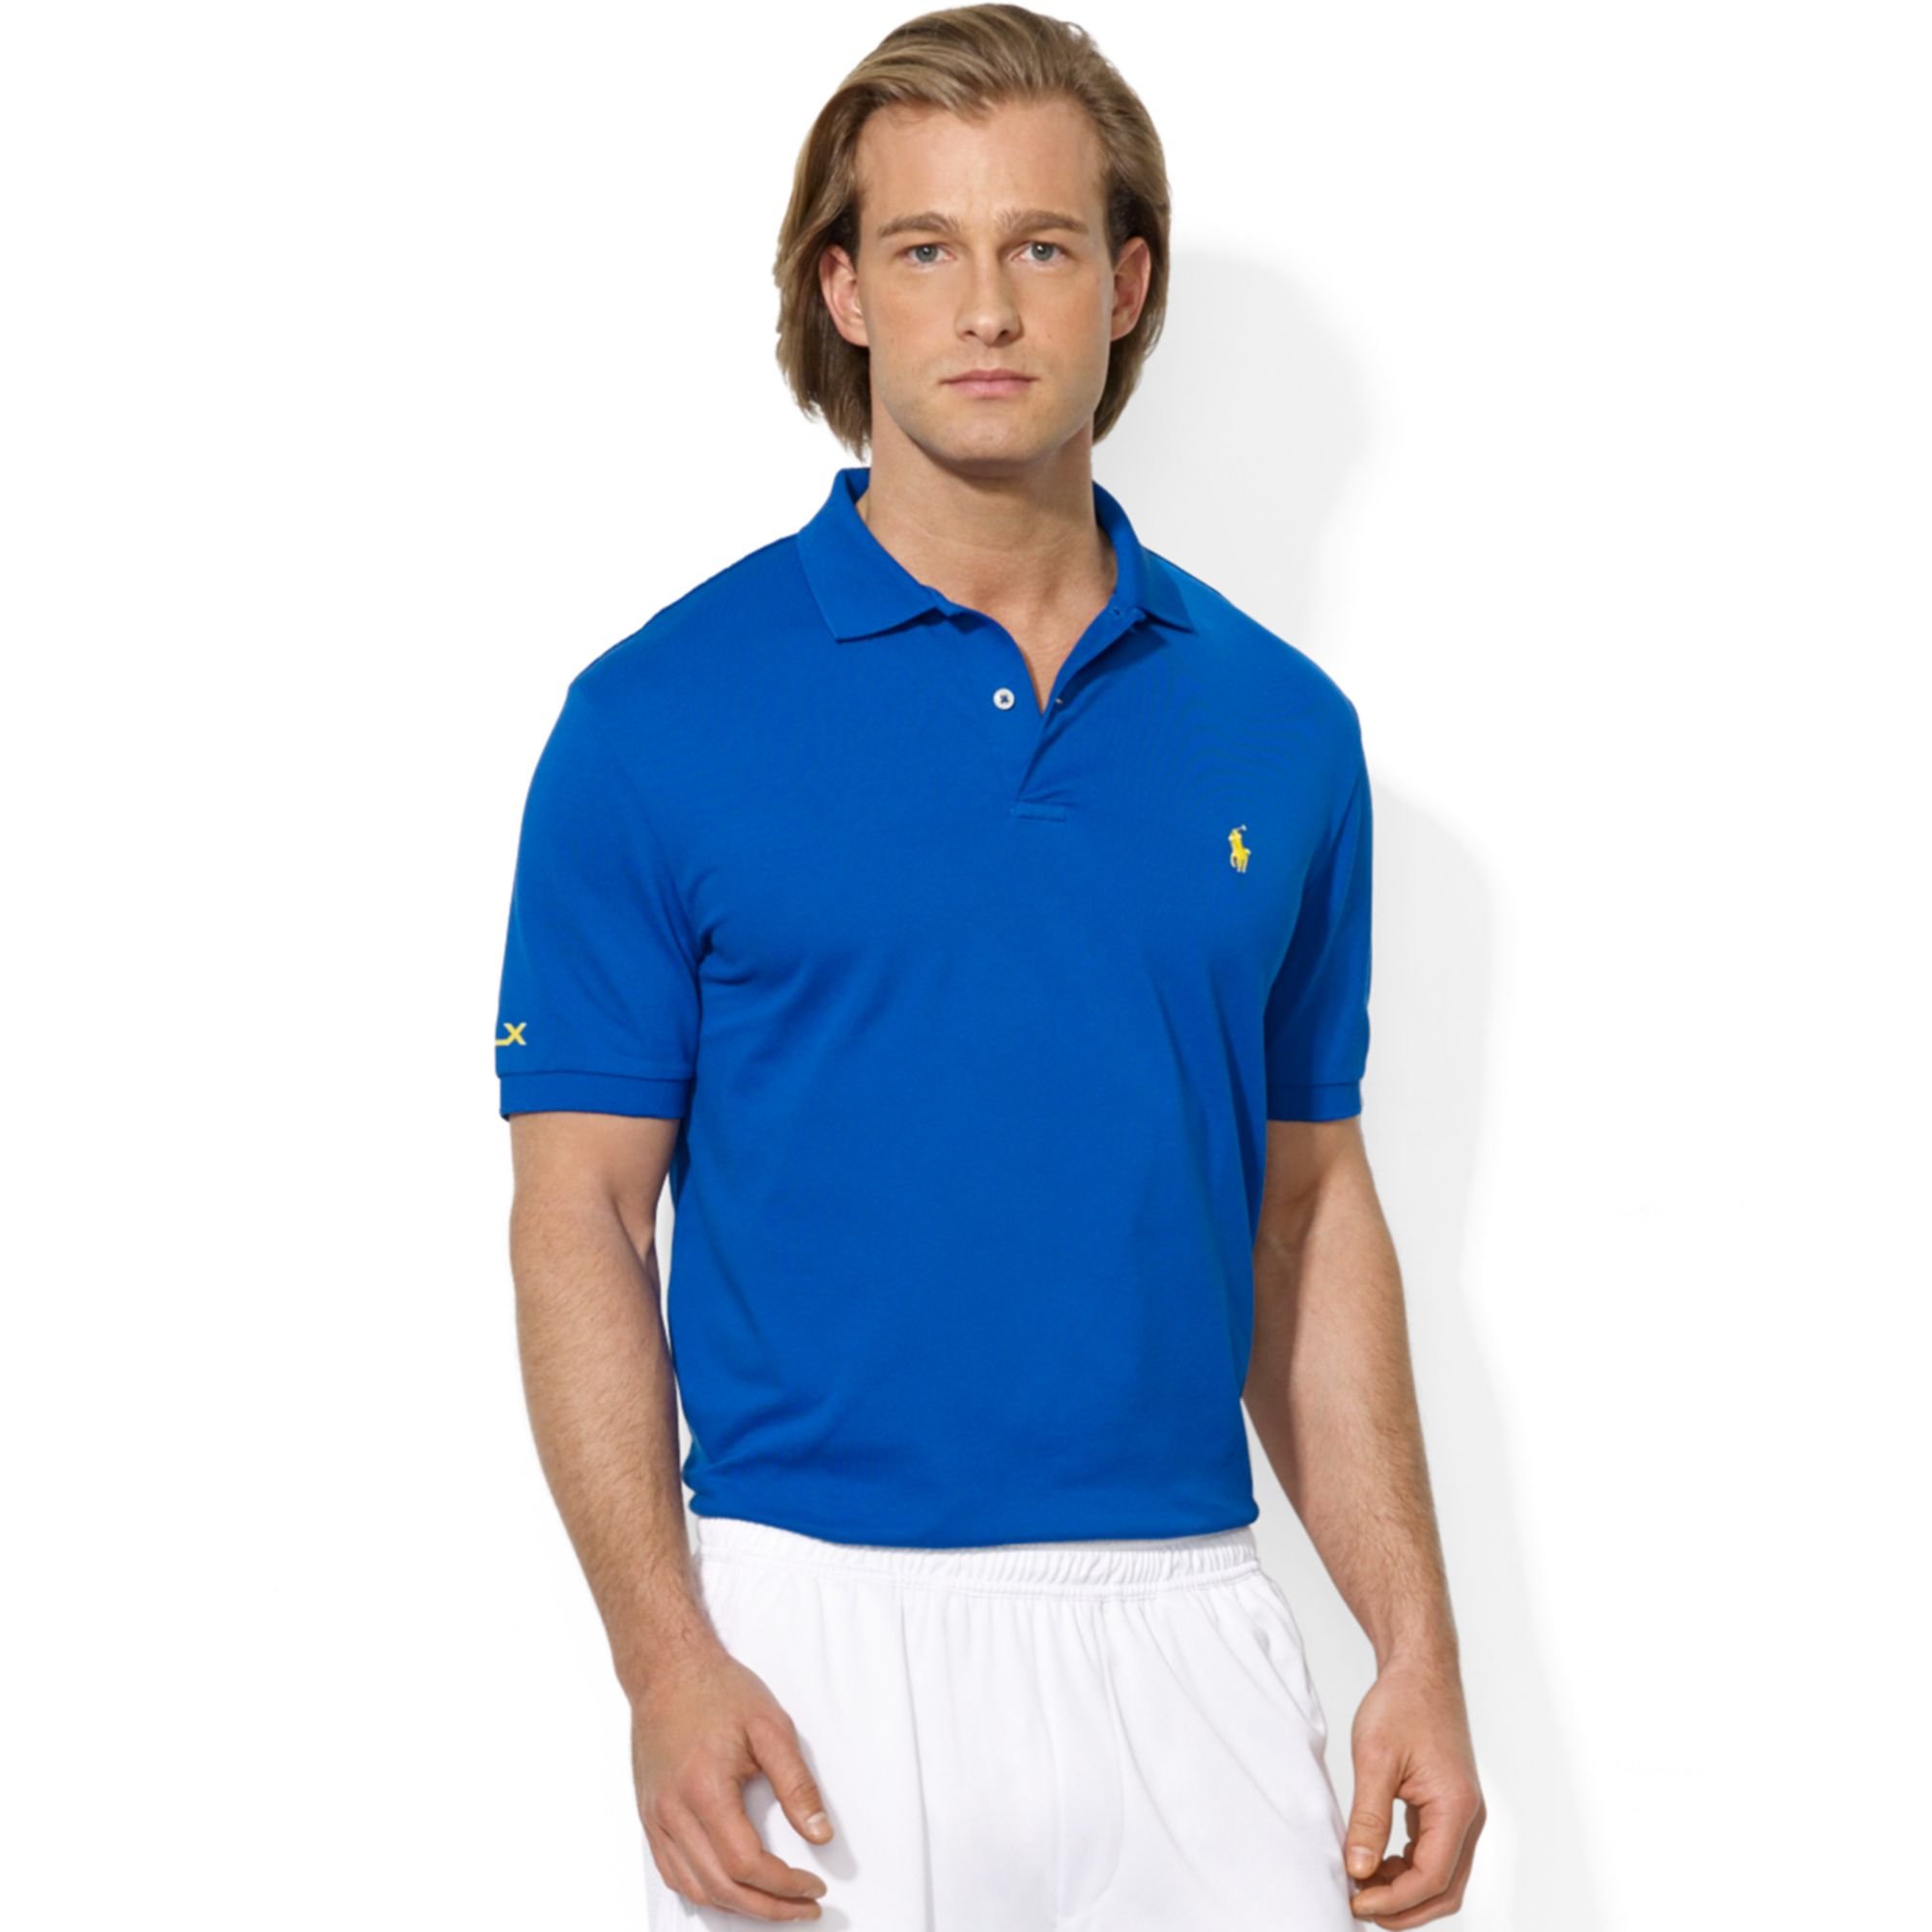 Polo Ralph Lauren Polo Performance Polo Shirt in Blue for Men - Lyst